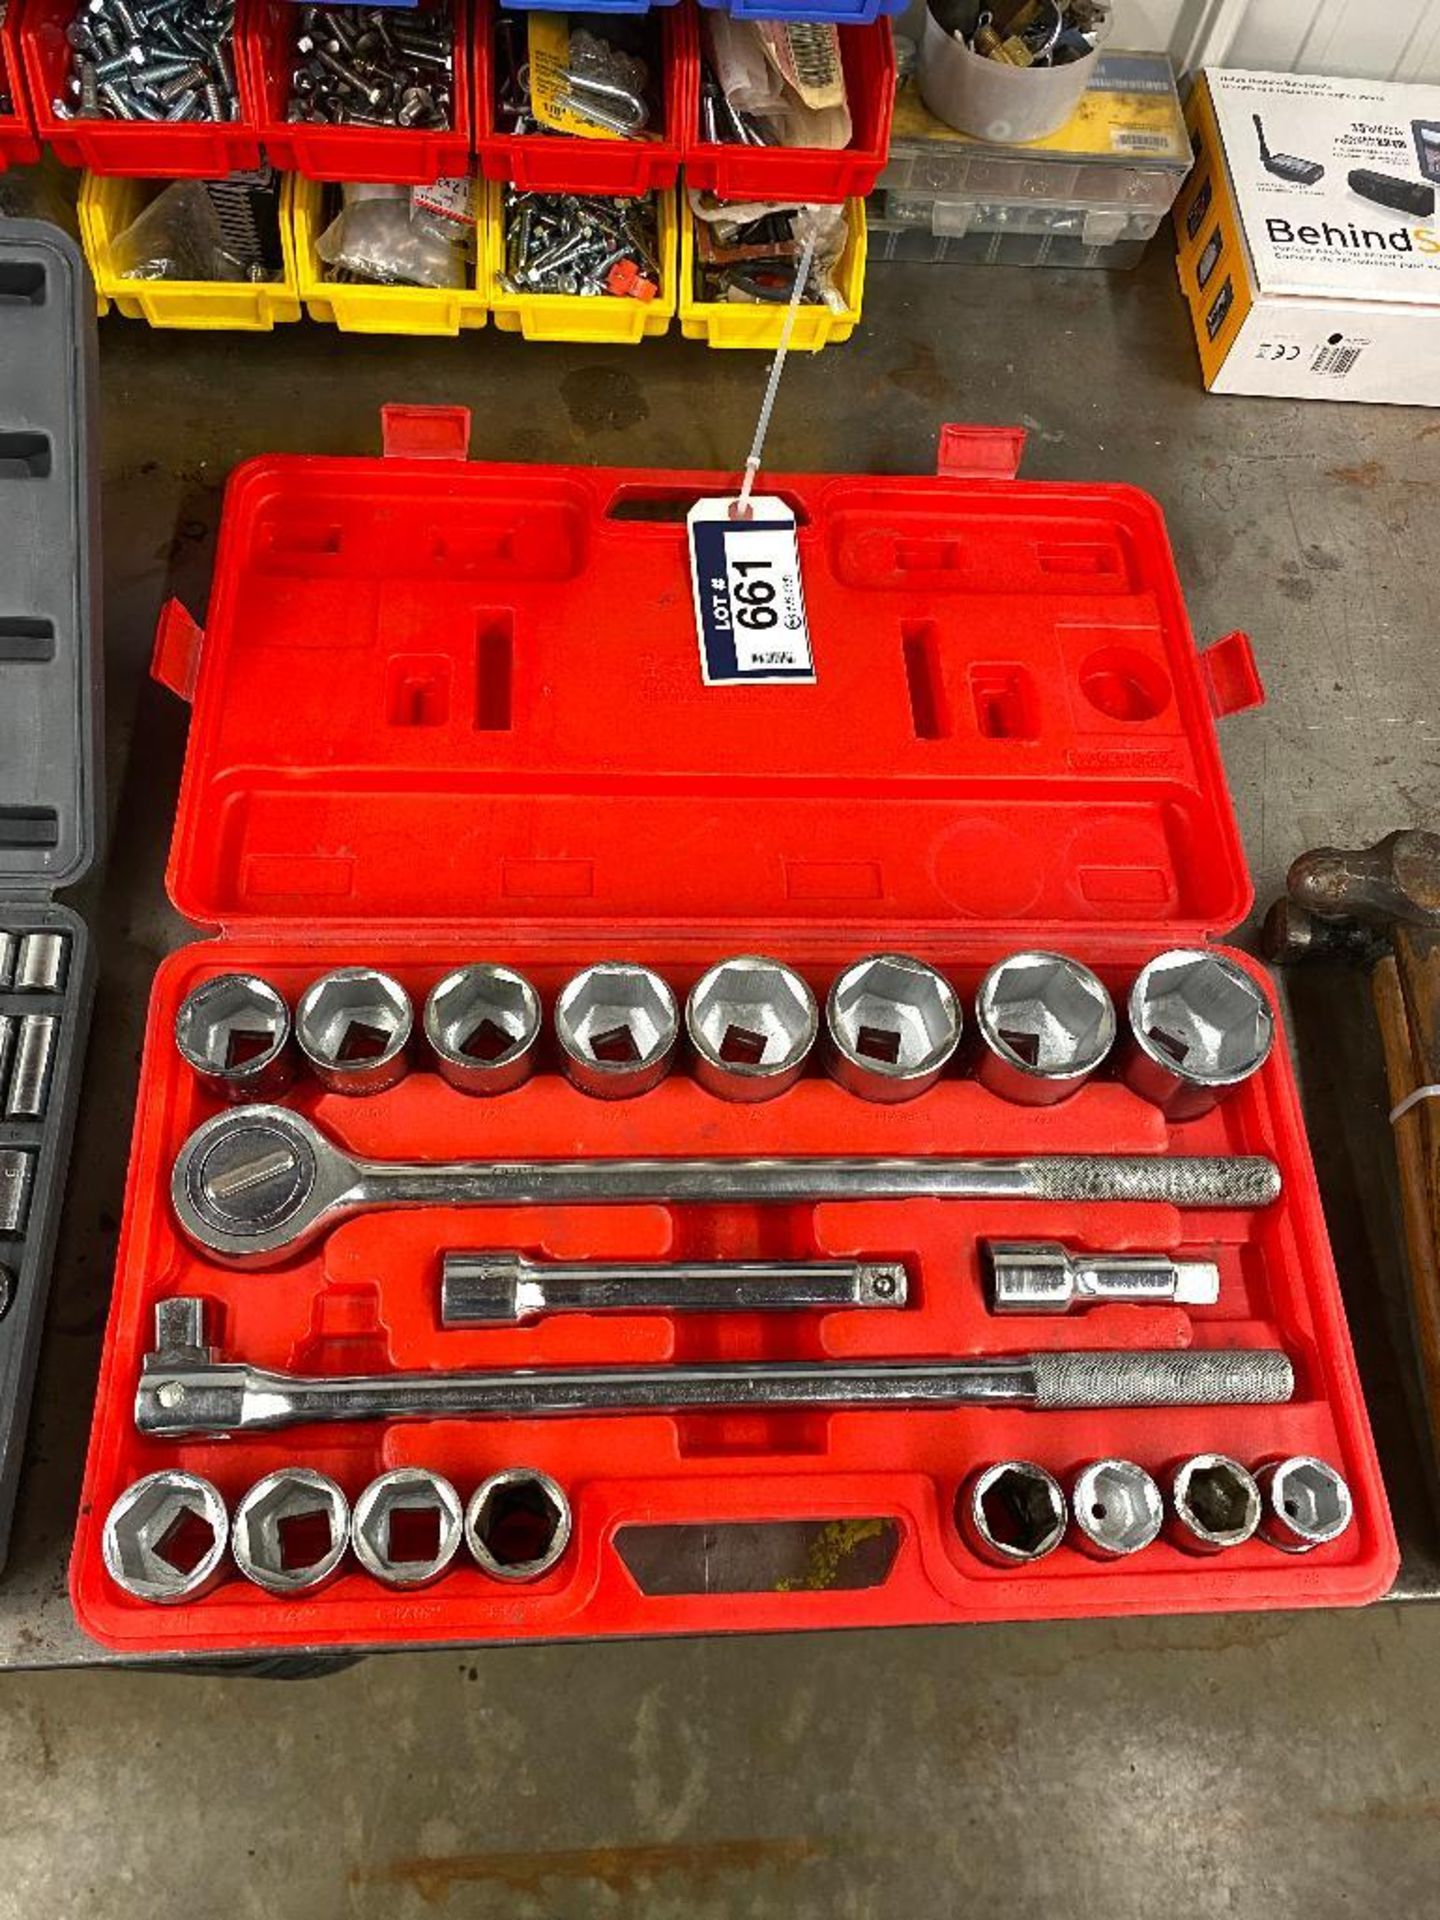 21-Piece Socket Wrench Set 3/4" Drive 7/8"-2" - Image 2 of 3